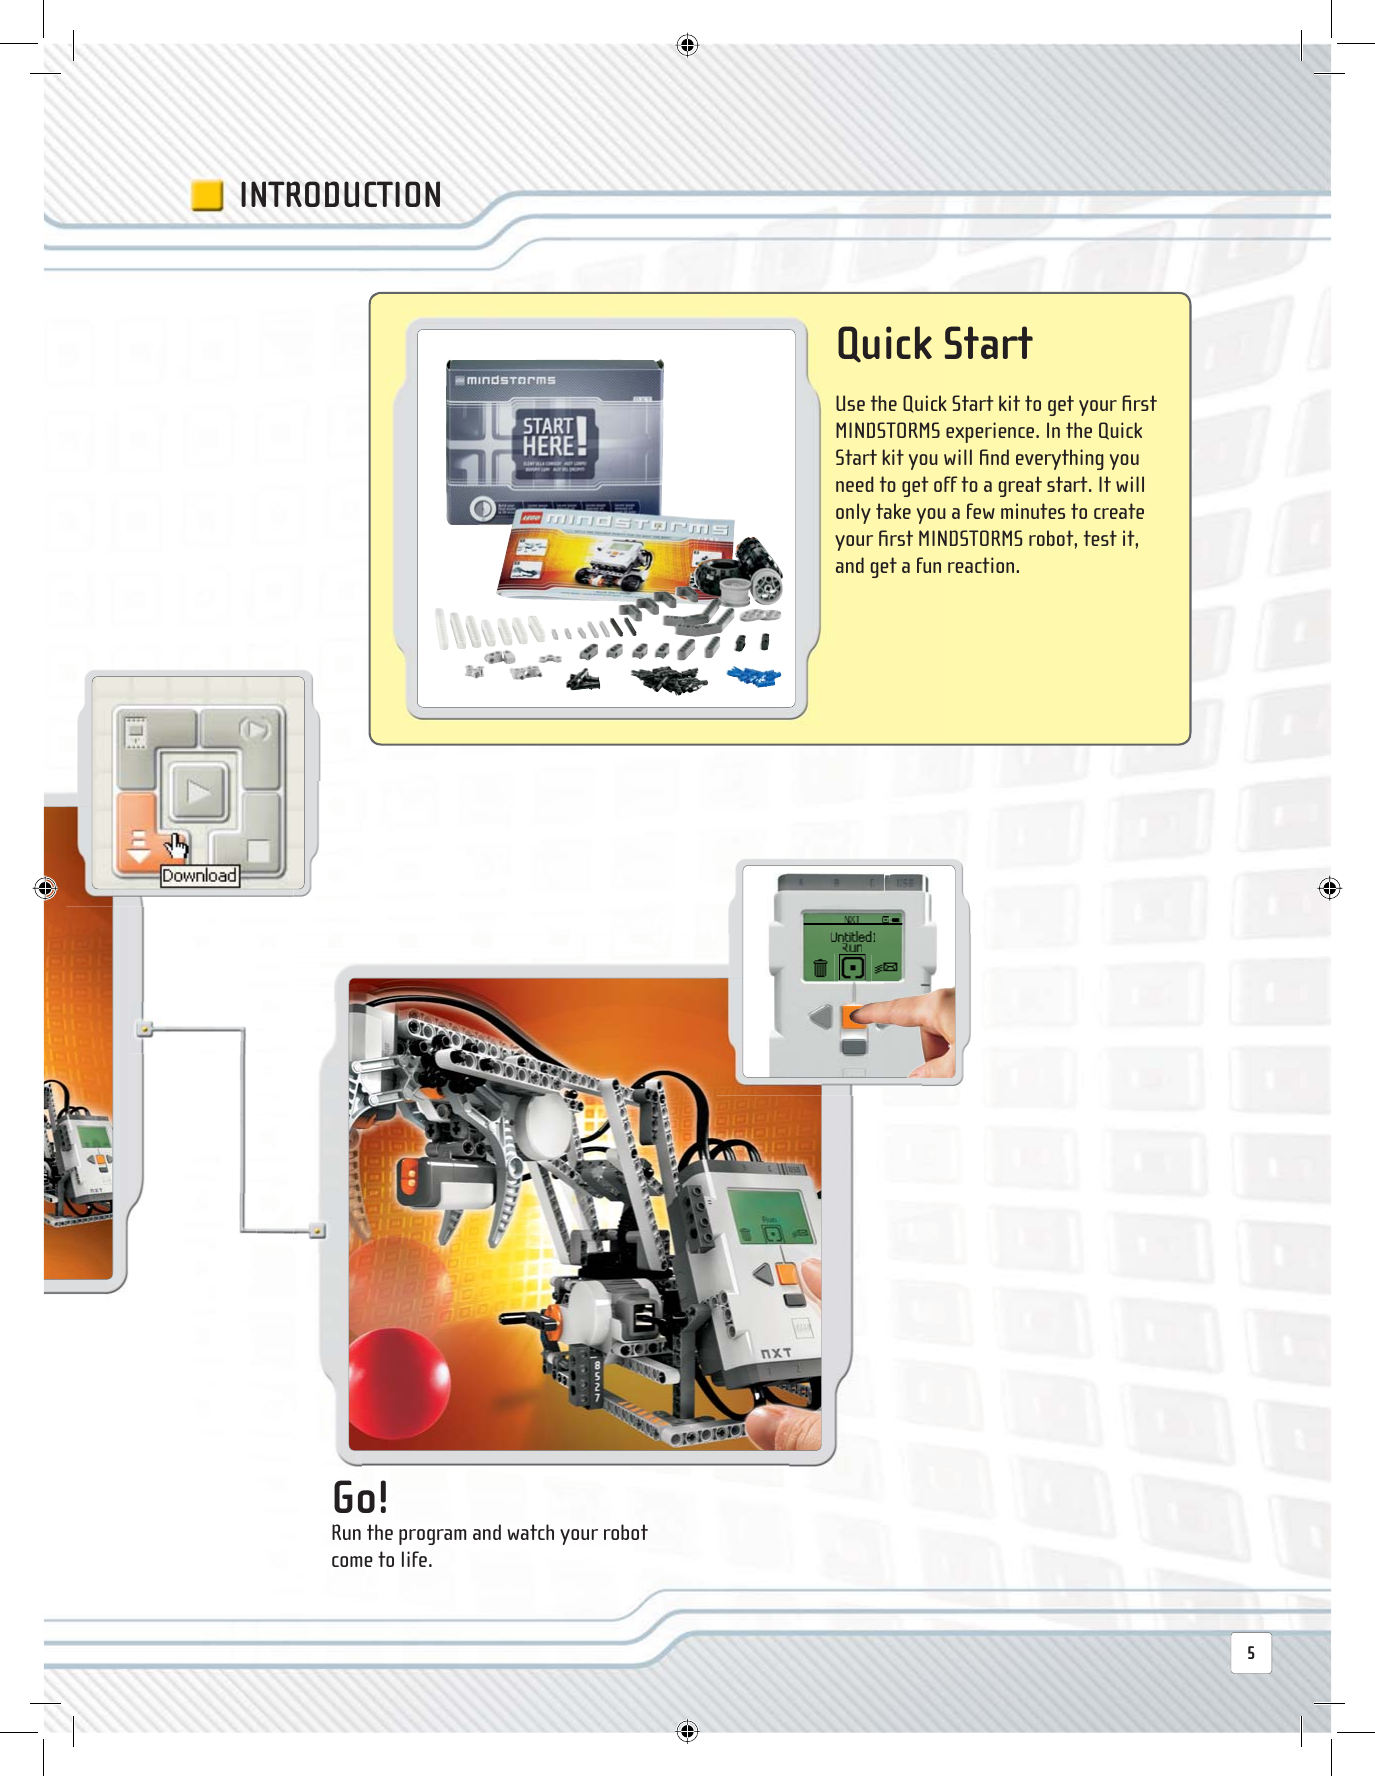  Go! Run the program and watch your robot come to life.INTRODUCTION Quick  Start Use the Quick Start kit to get your ﬁ rst MINDSTORMS experience. In the Quick Start kit you will ﬁ nd everything you need to get off to a great start. It will only take you a few minutes to create your ﬁ rst MINDSTORMS robot, test it, and get a fun reaction.5